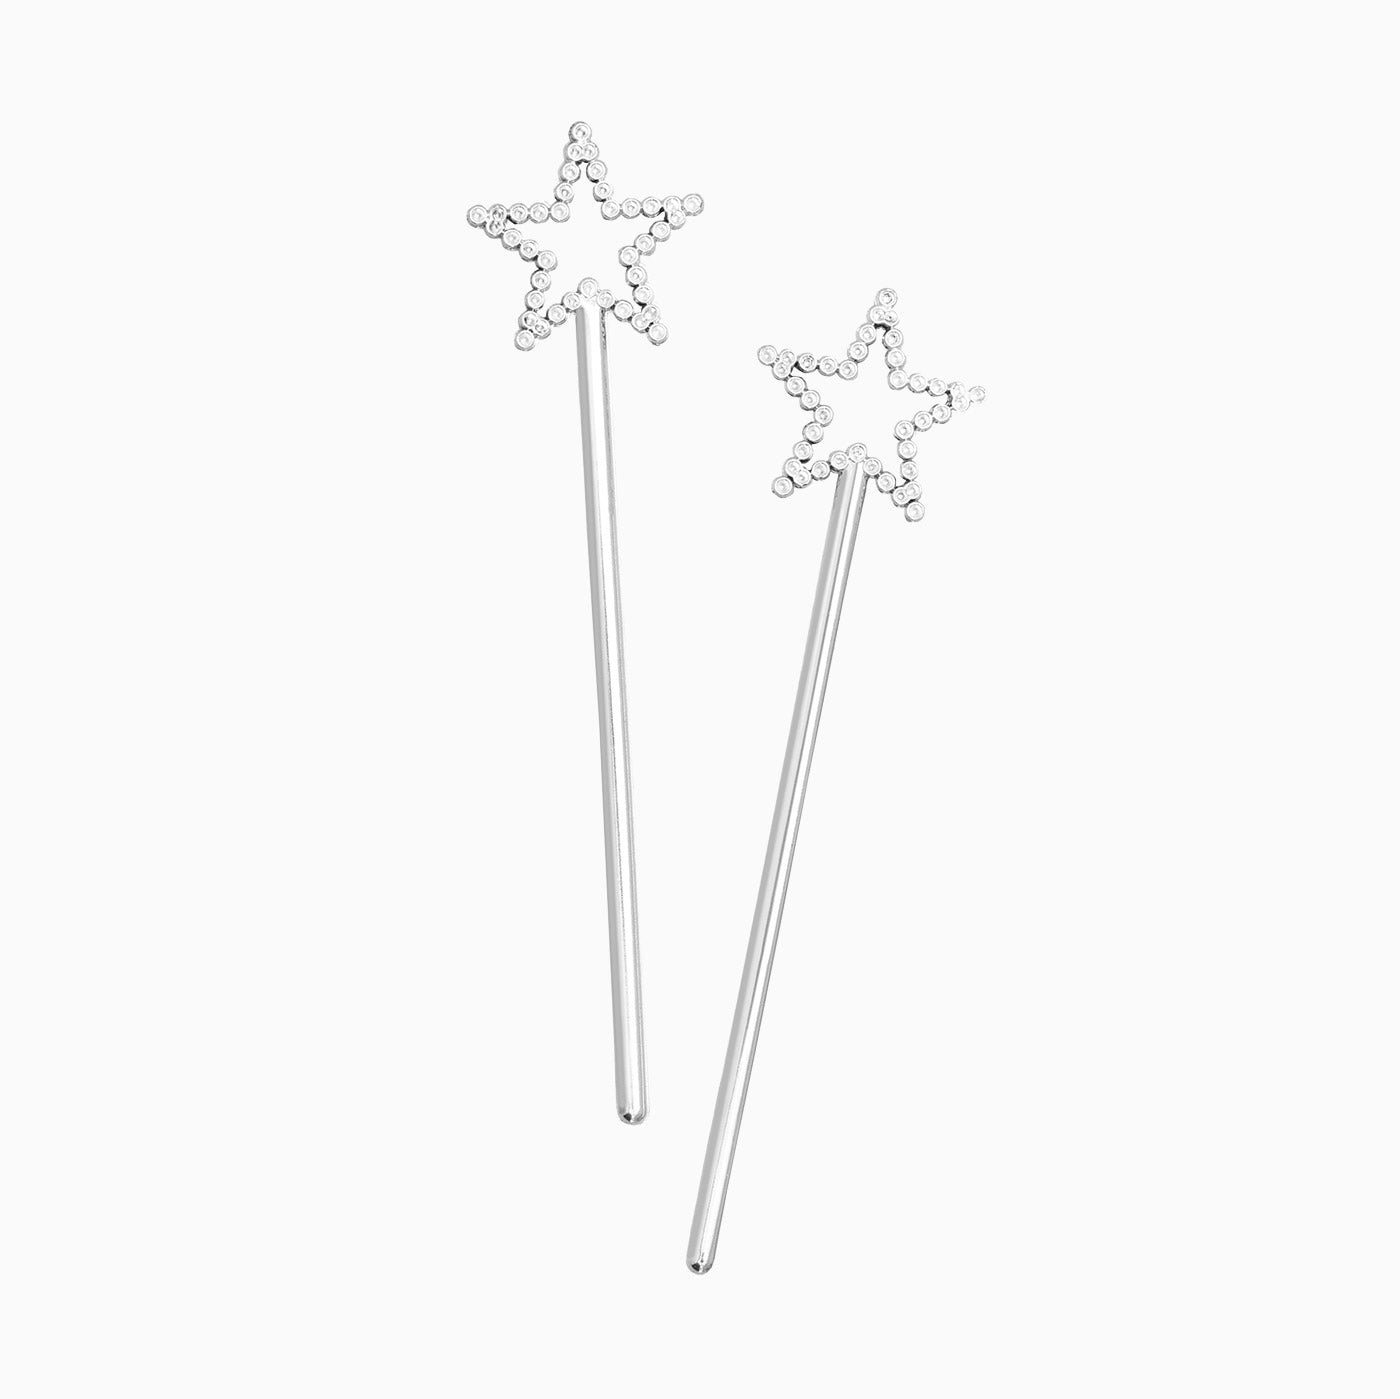 Toy Star Wands for Piñata